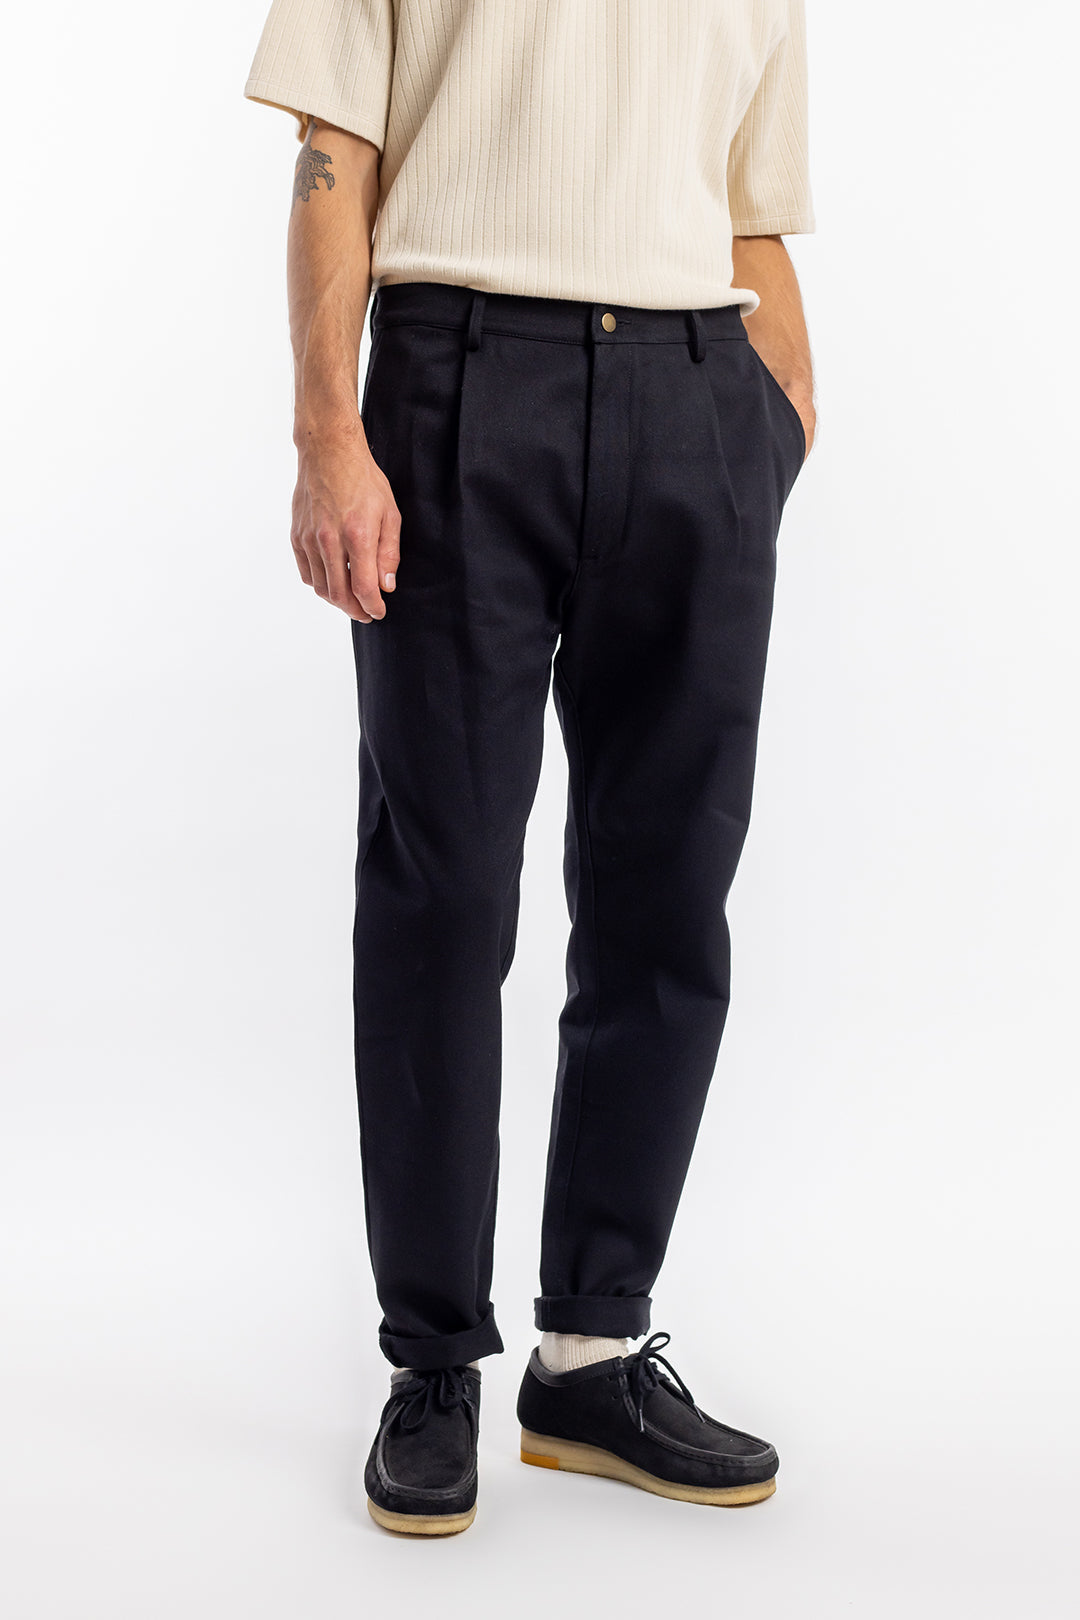 Black trousers made from 100% organic cotton from Rotholz